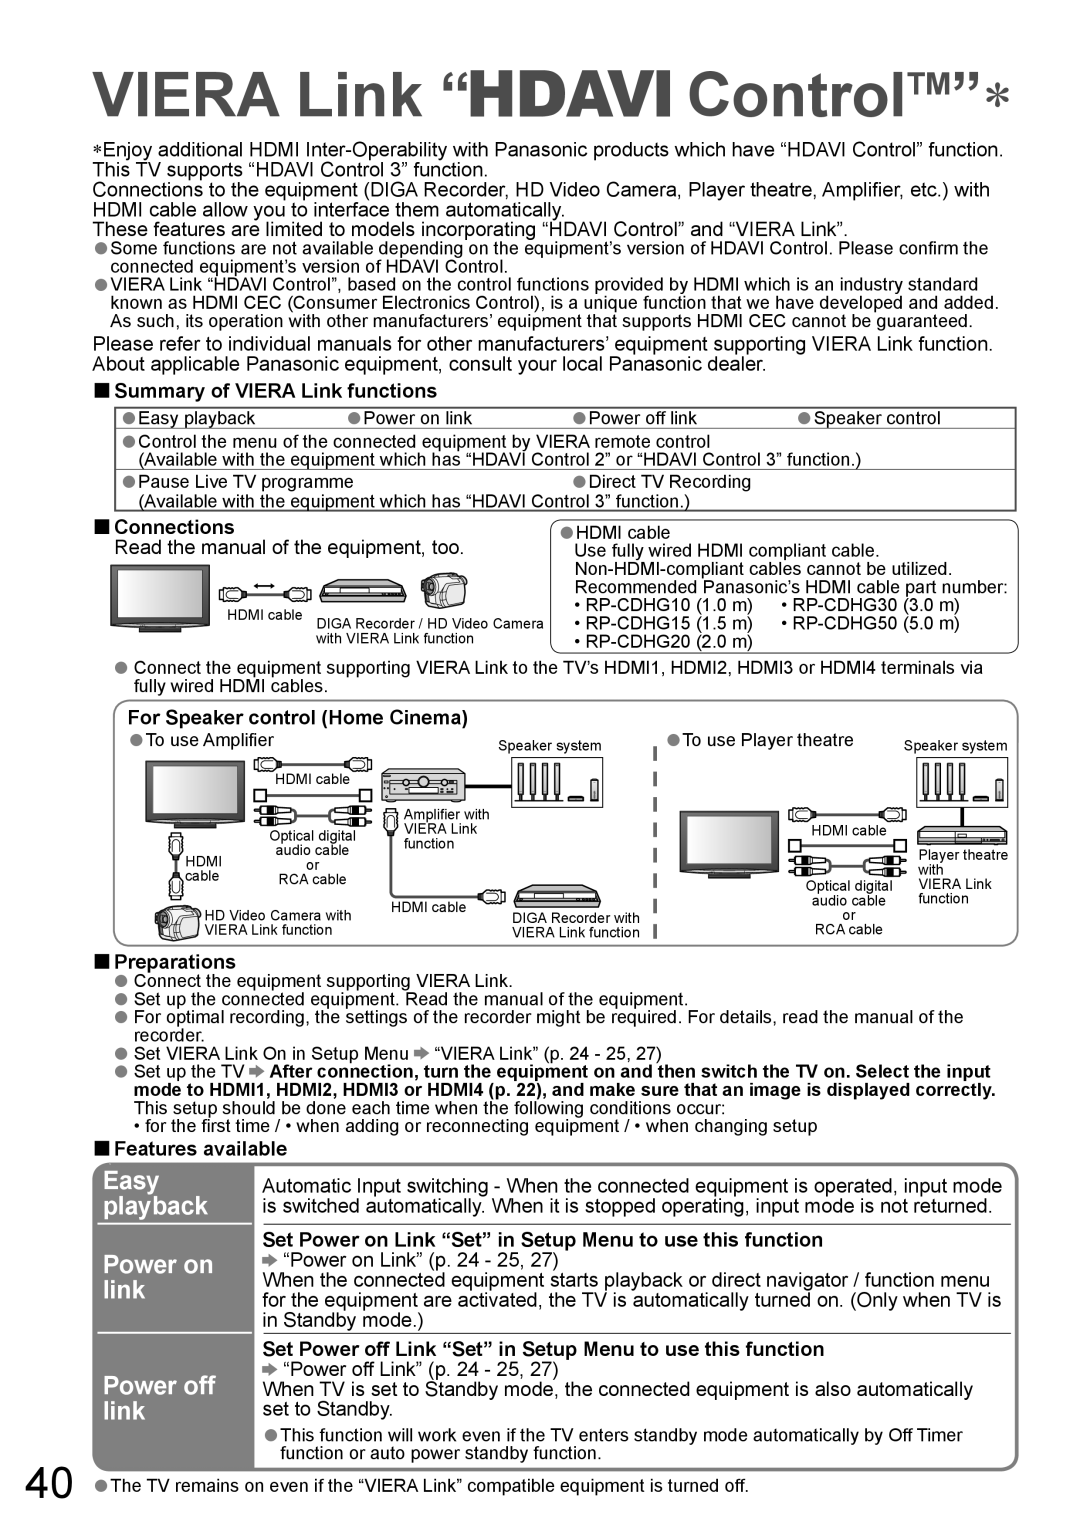 Panasonic TH-50PZ850AZ VIERA Link “ ControlTM”∗, Easy playback, Summary of VIERA Link functions, Connections, Preparations 